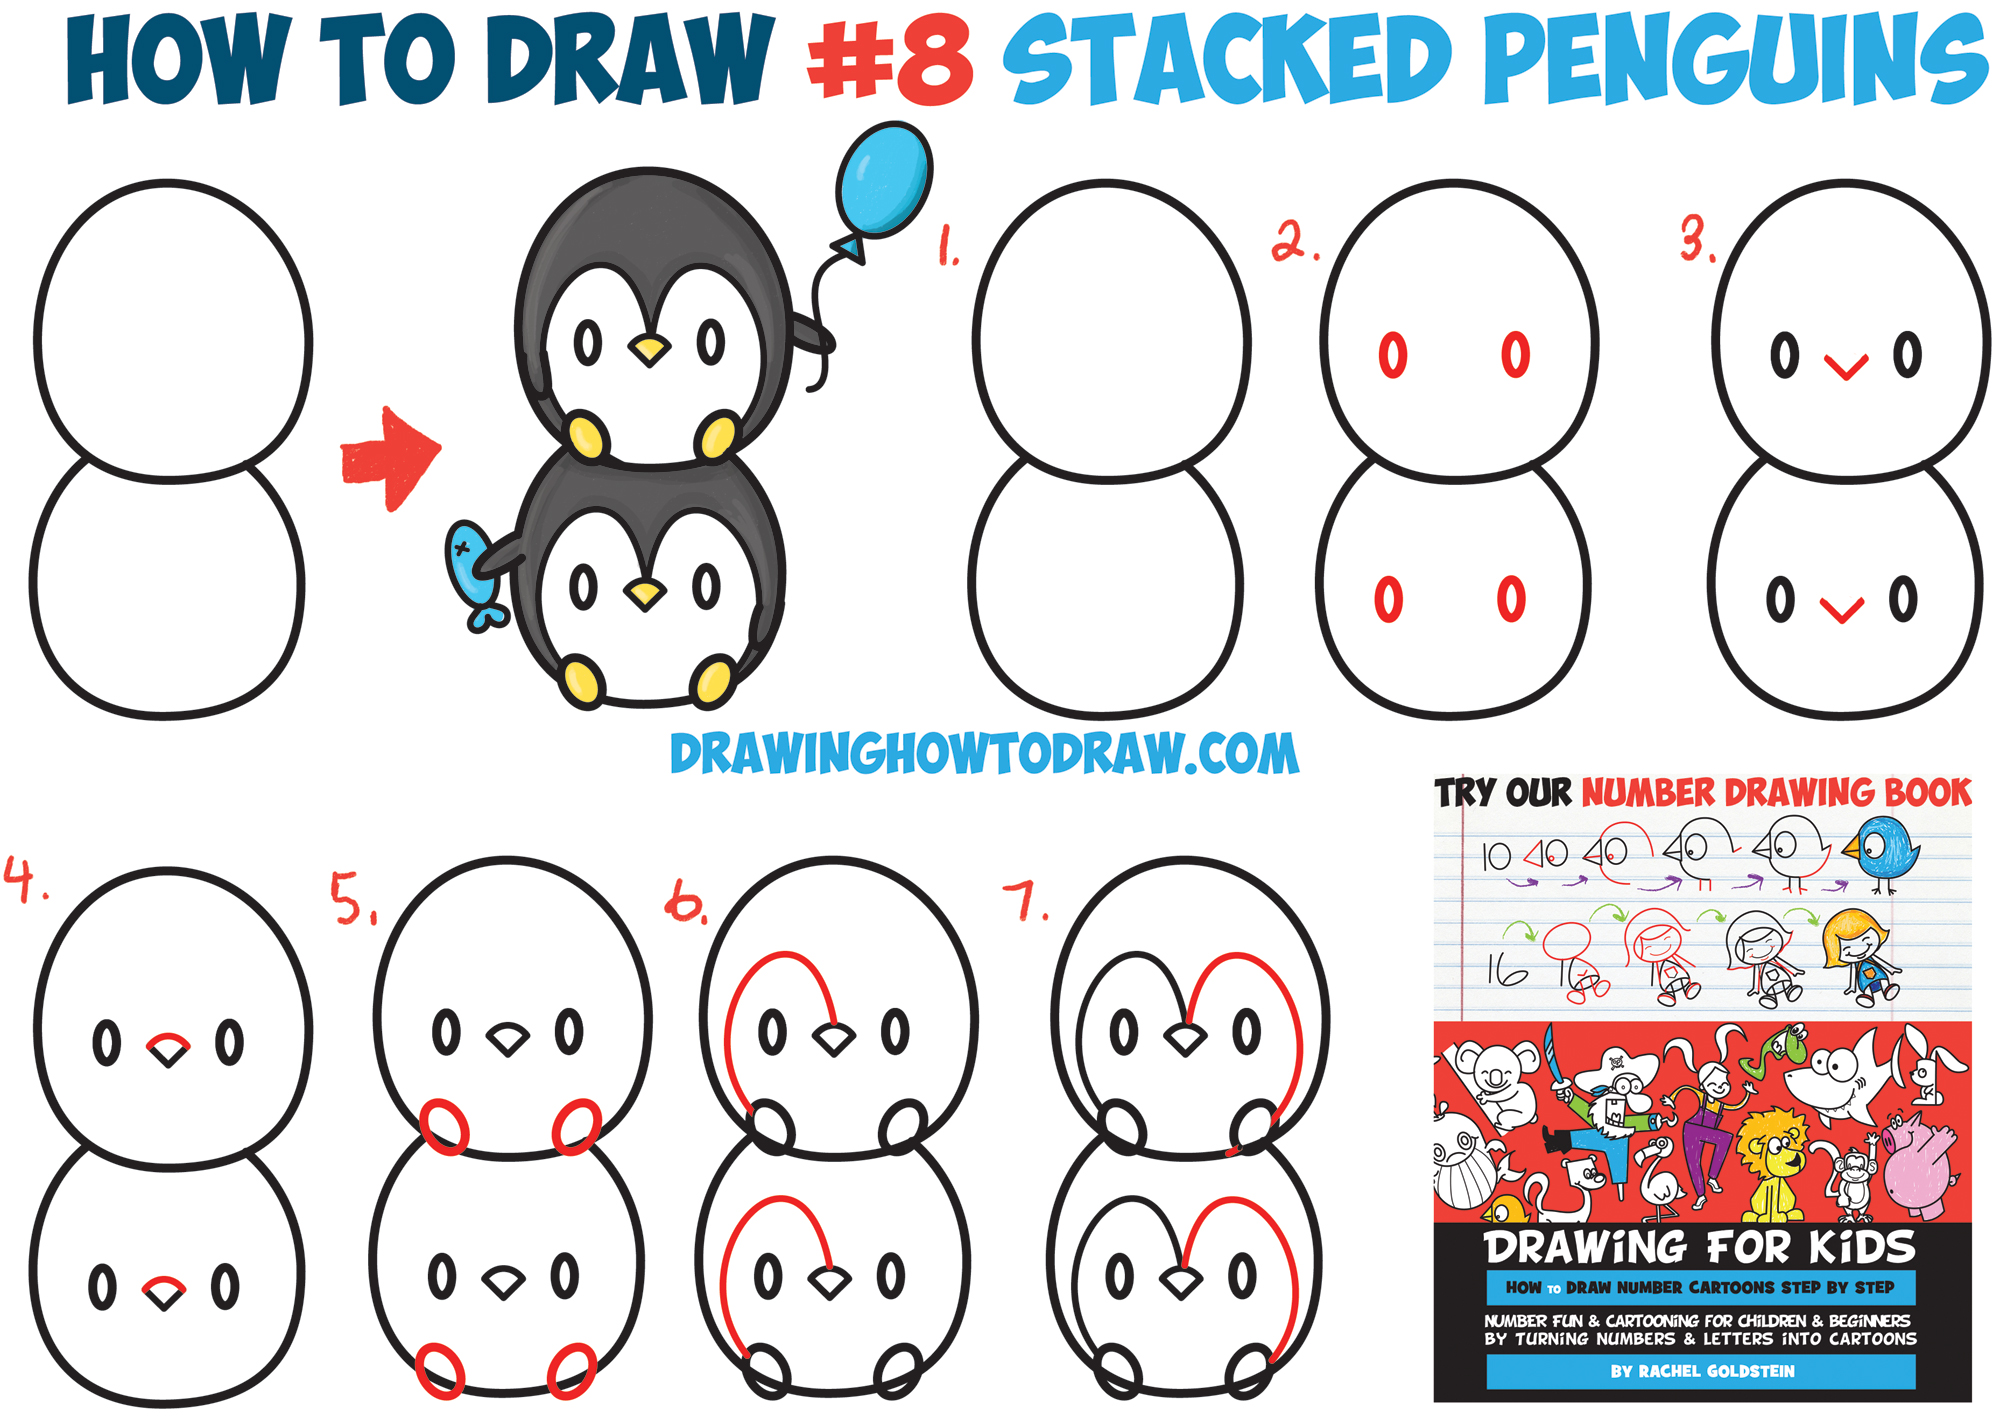 How to Draw Cute Kawaii Penguins Stacked from #8 with Easy Step by Step Drawing Tutorial for Kids and Beginners